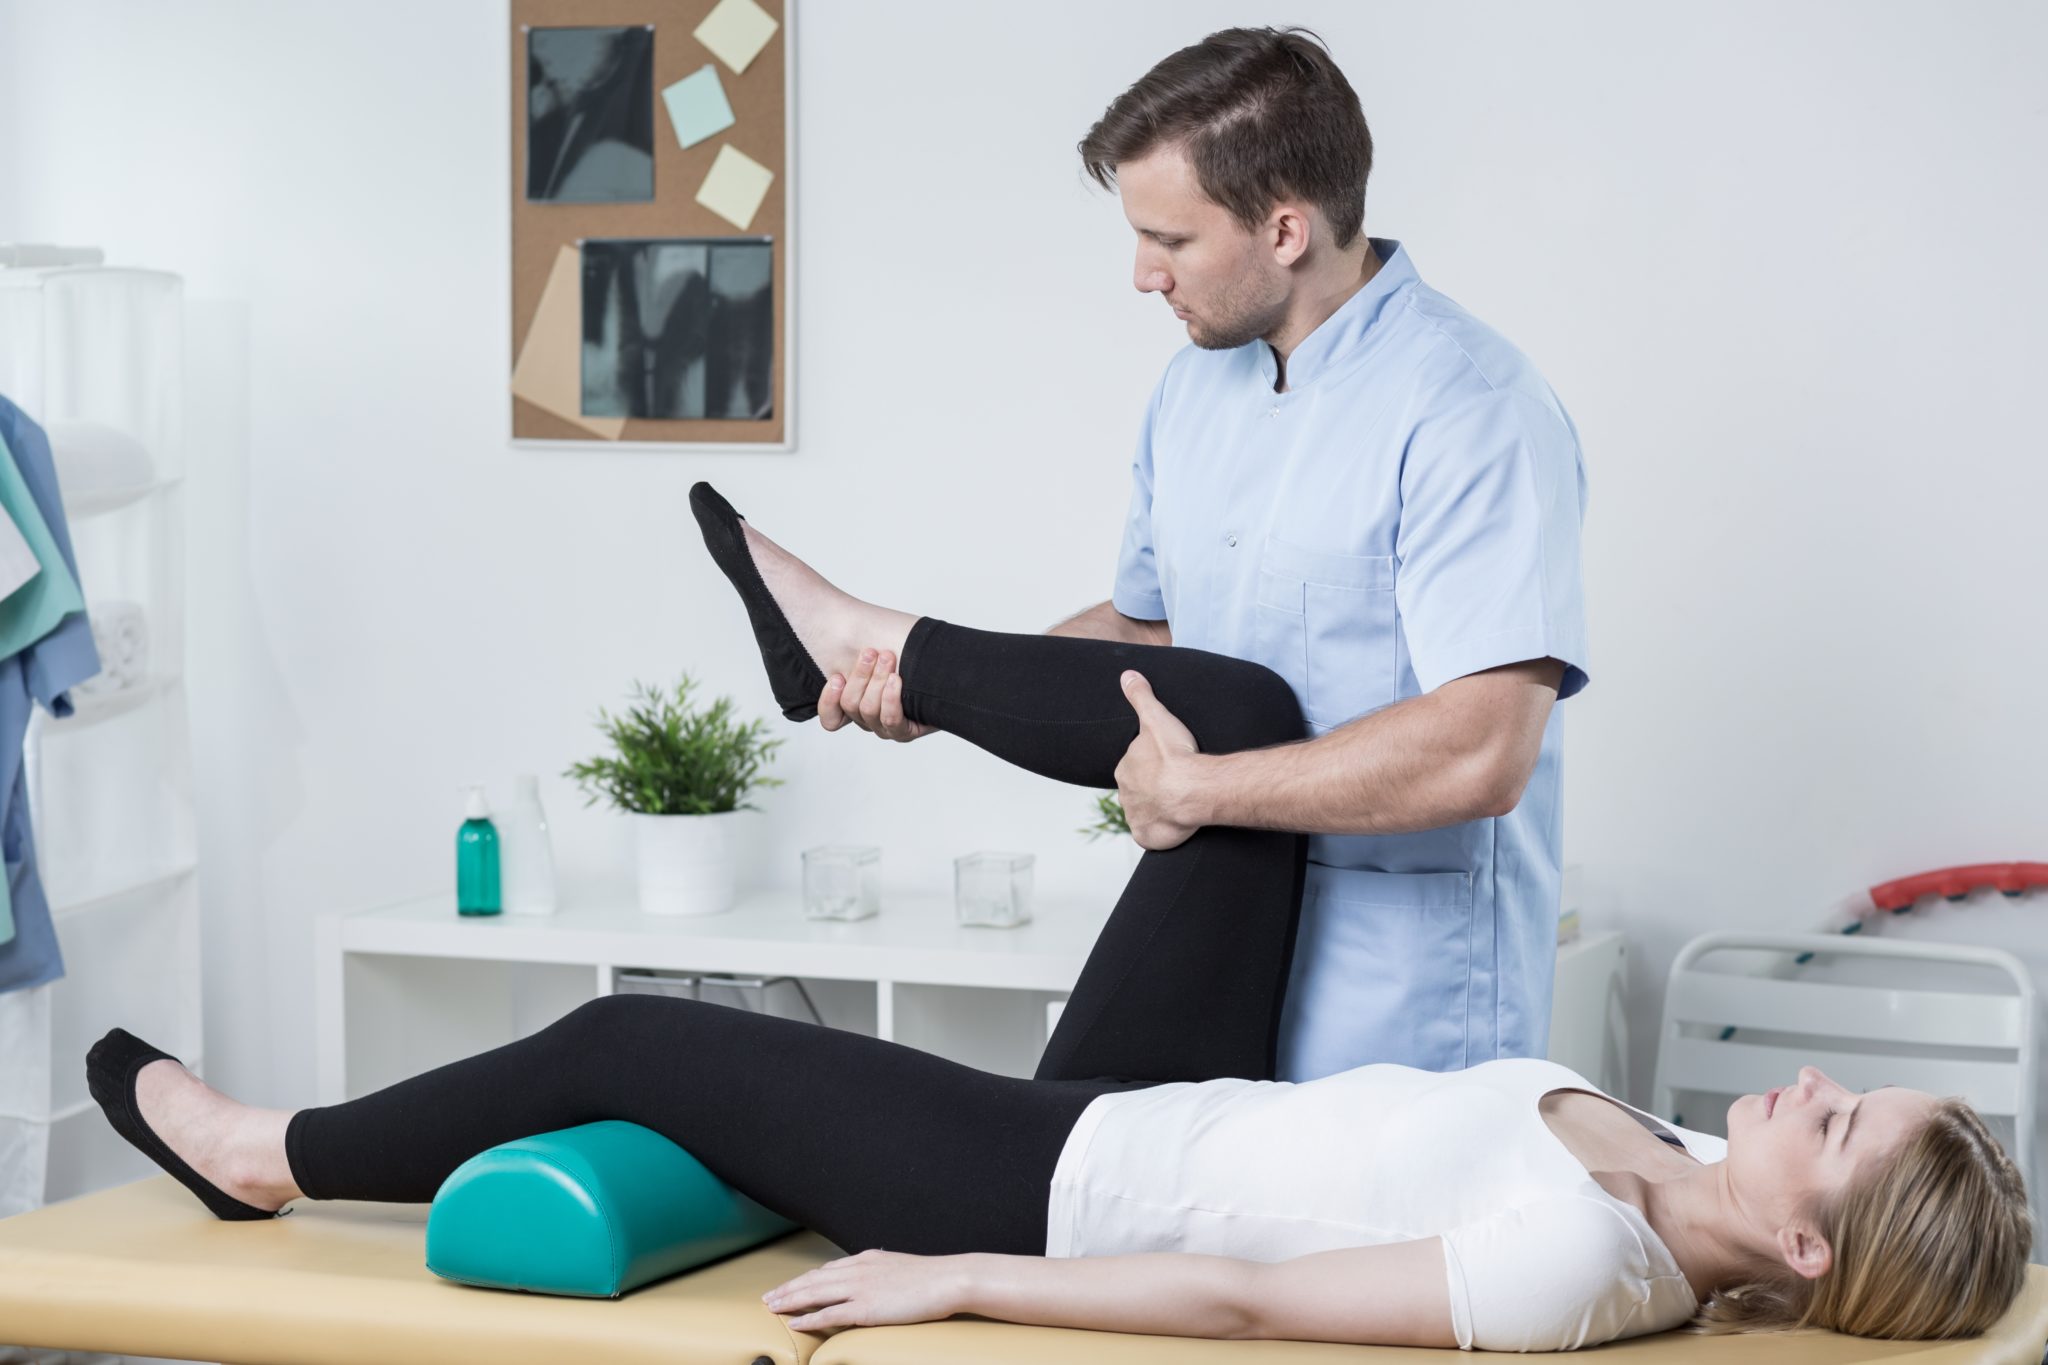 Male physiotherapist exercising with patient having knee pain